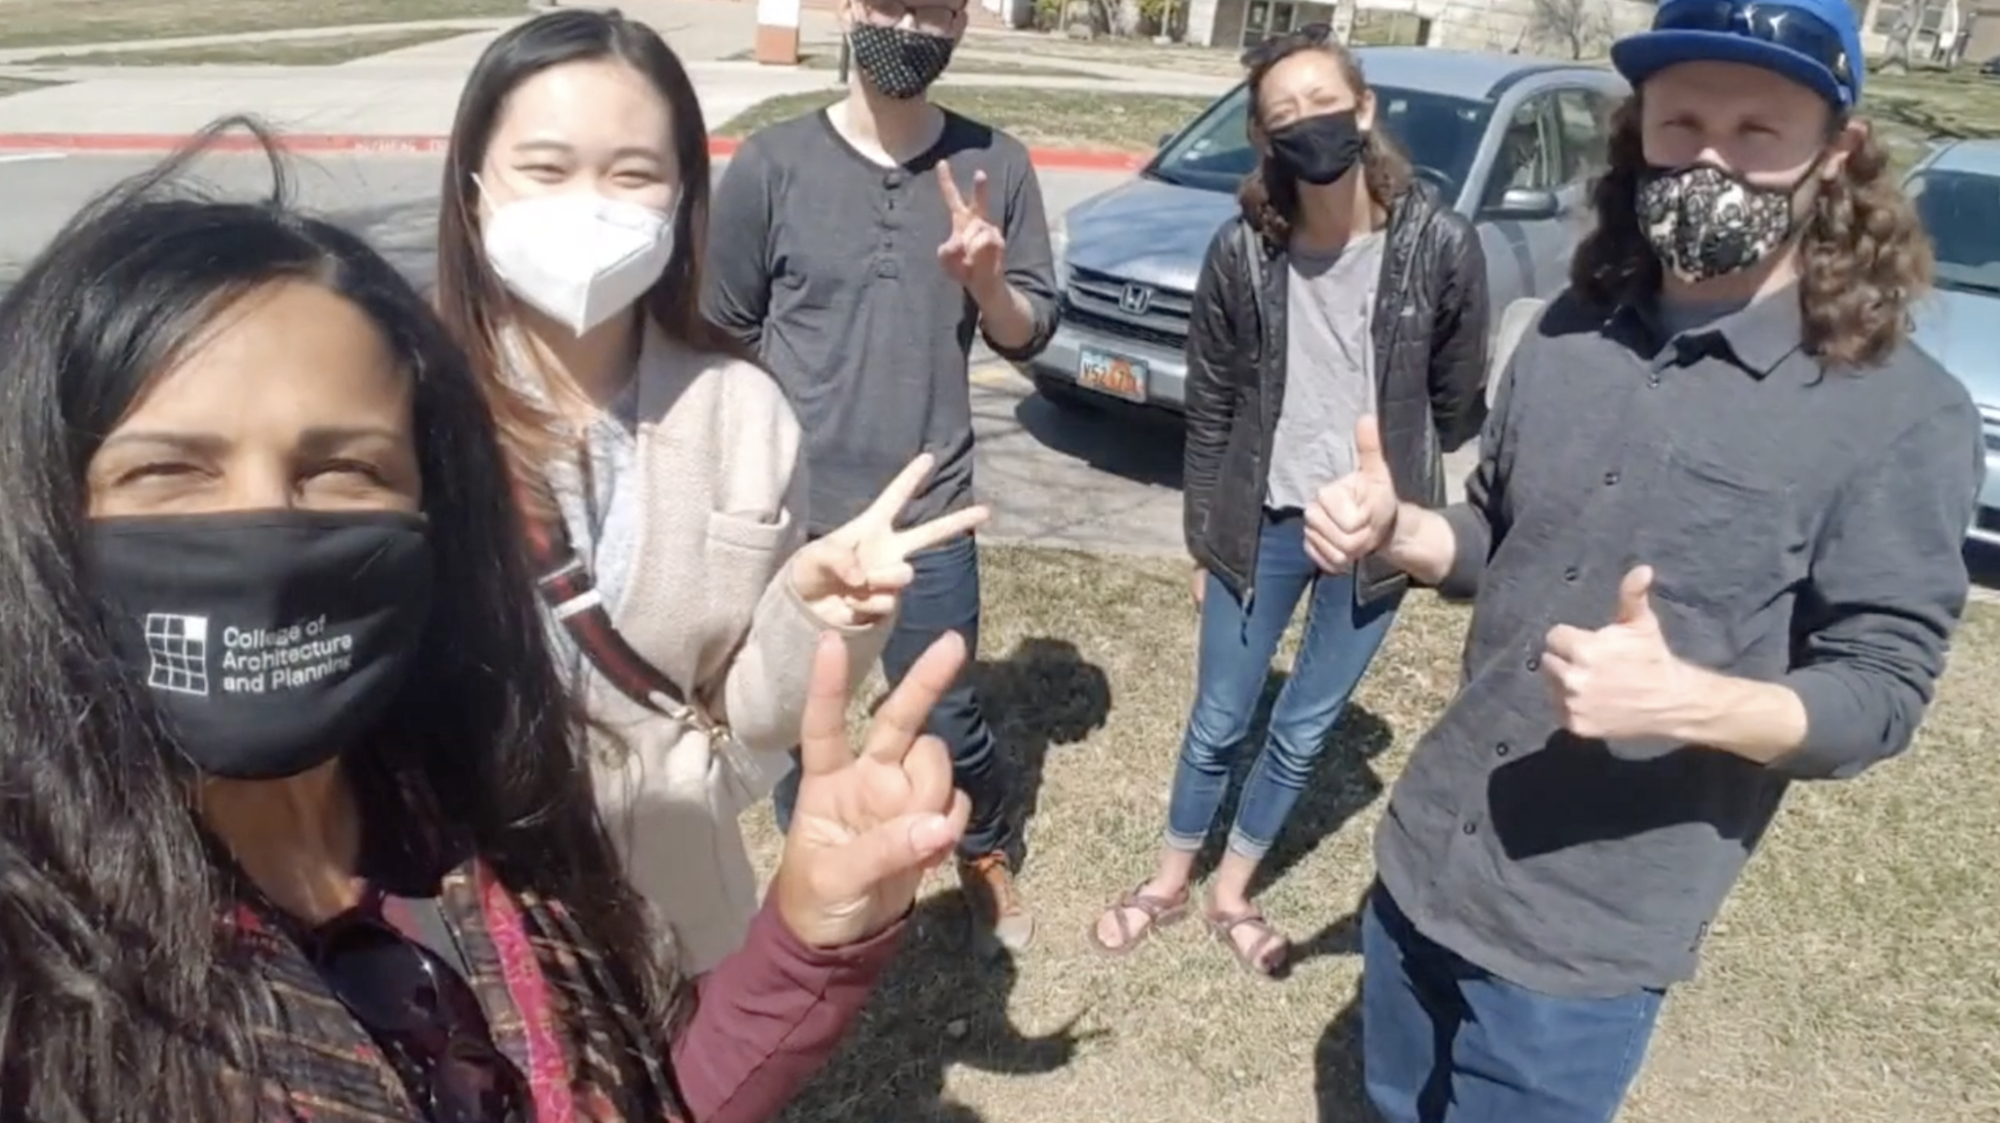 Five university students are wearing masks and giving approval hand signs (thumbs up, Vee). They are standing on grass. Two cars and a building are visible behind them.